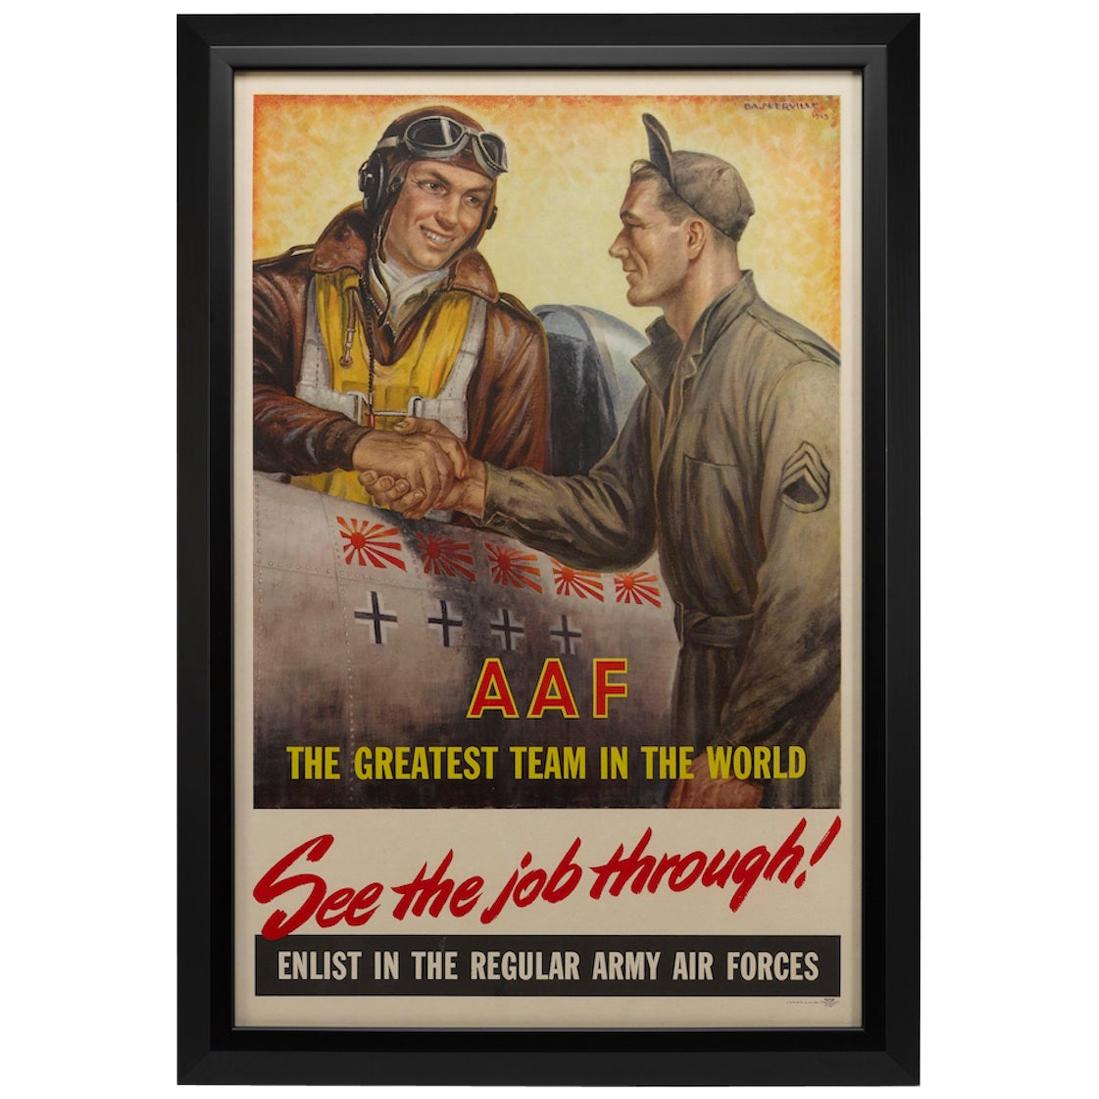 Army Air Forces Poster, "See the Job Through" by Baskerville, WWII Poster, 1945